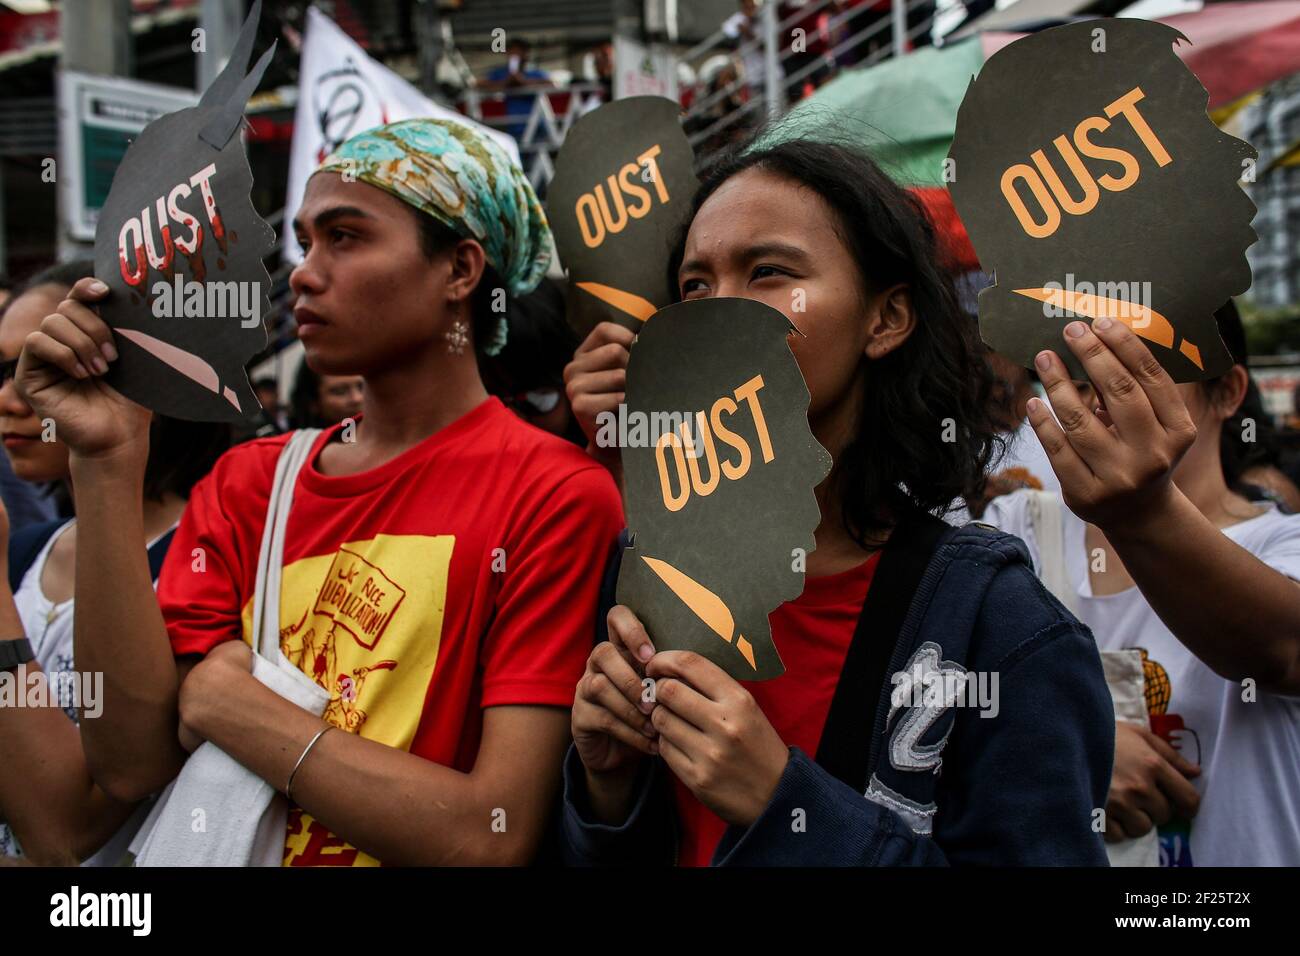 Protesters hold placards as they call for the ouster of President Rodrigo Duterte near the Malacanang Palace in Manila, Philippines. Stock Photo